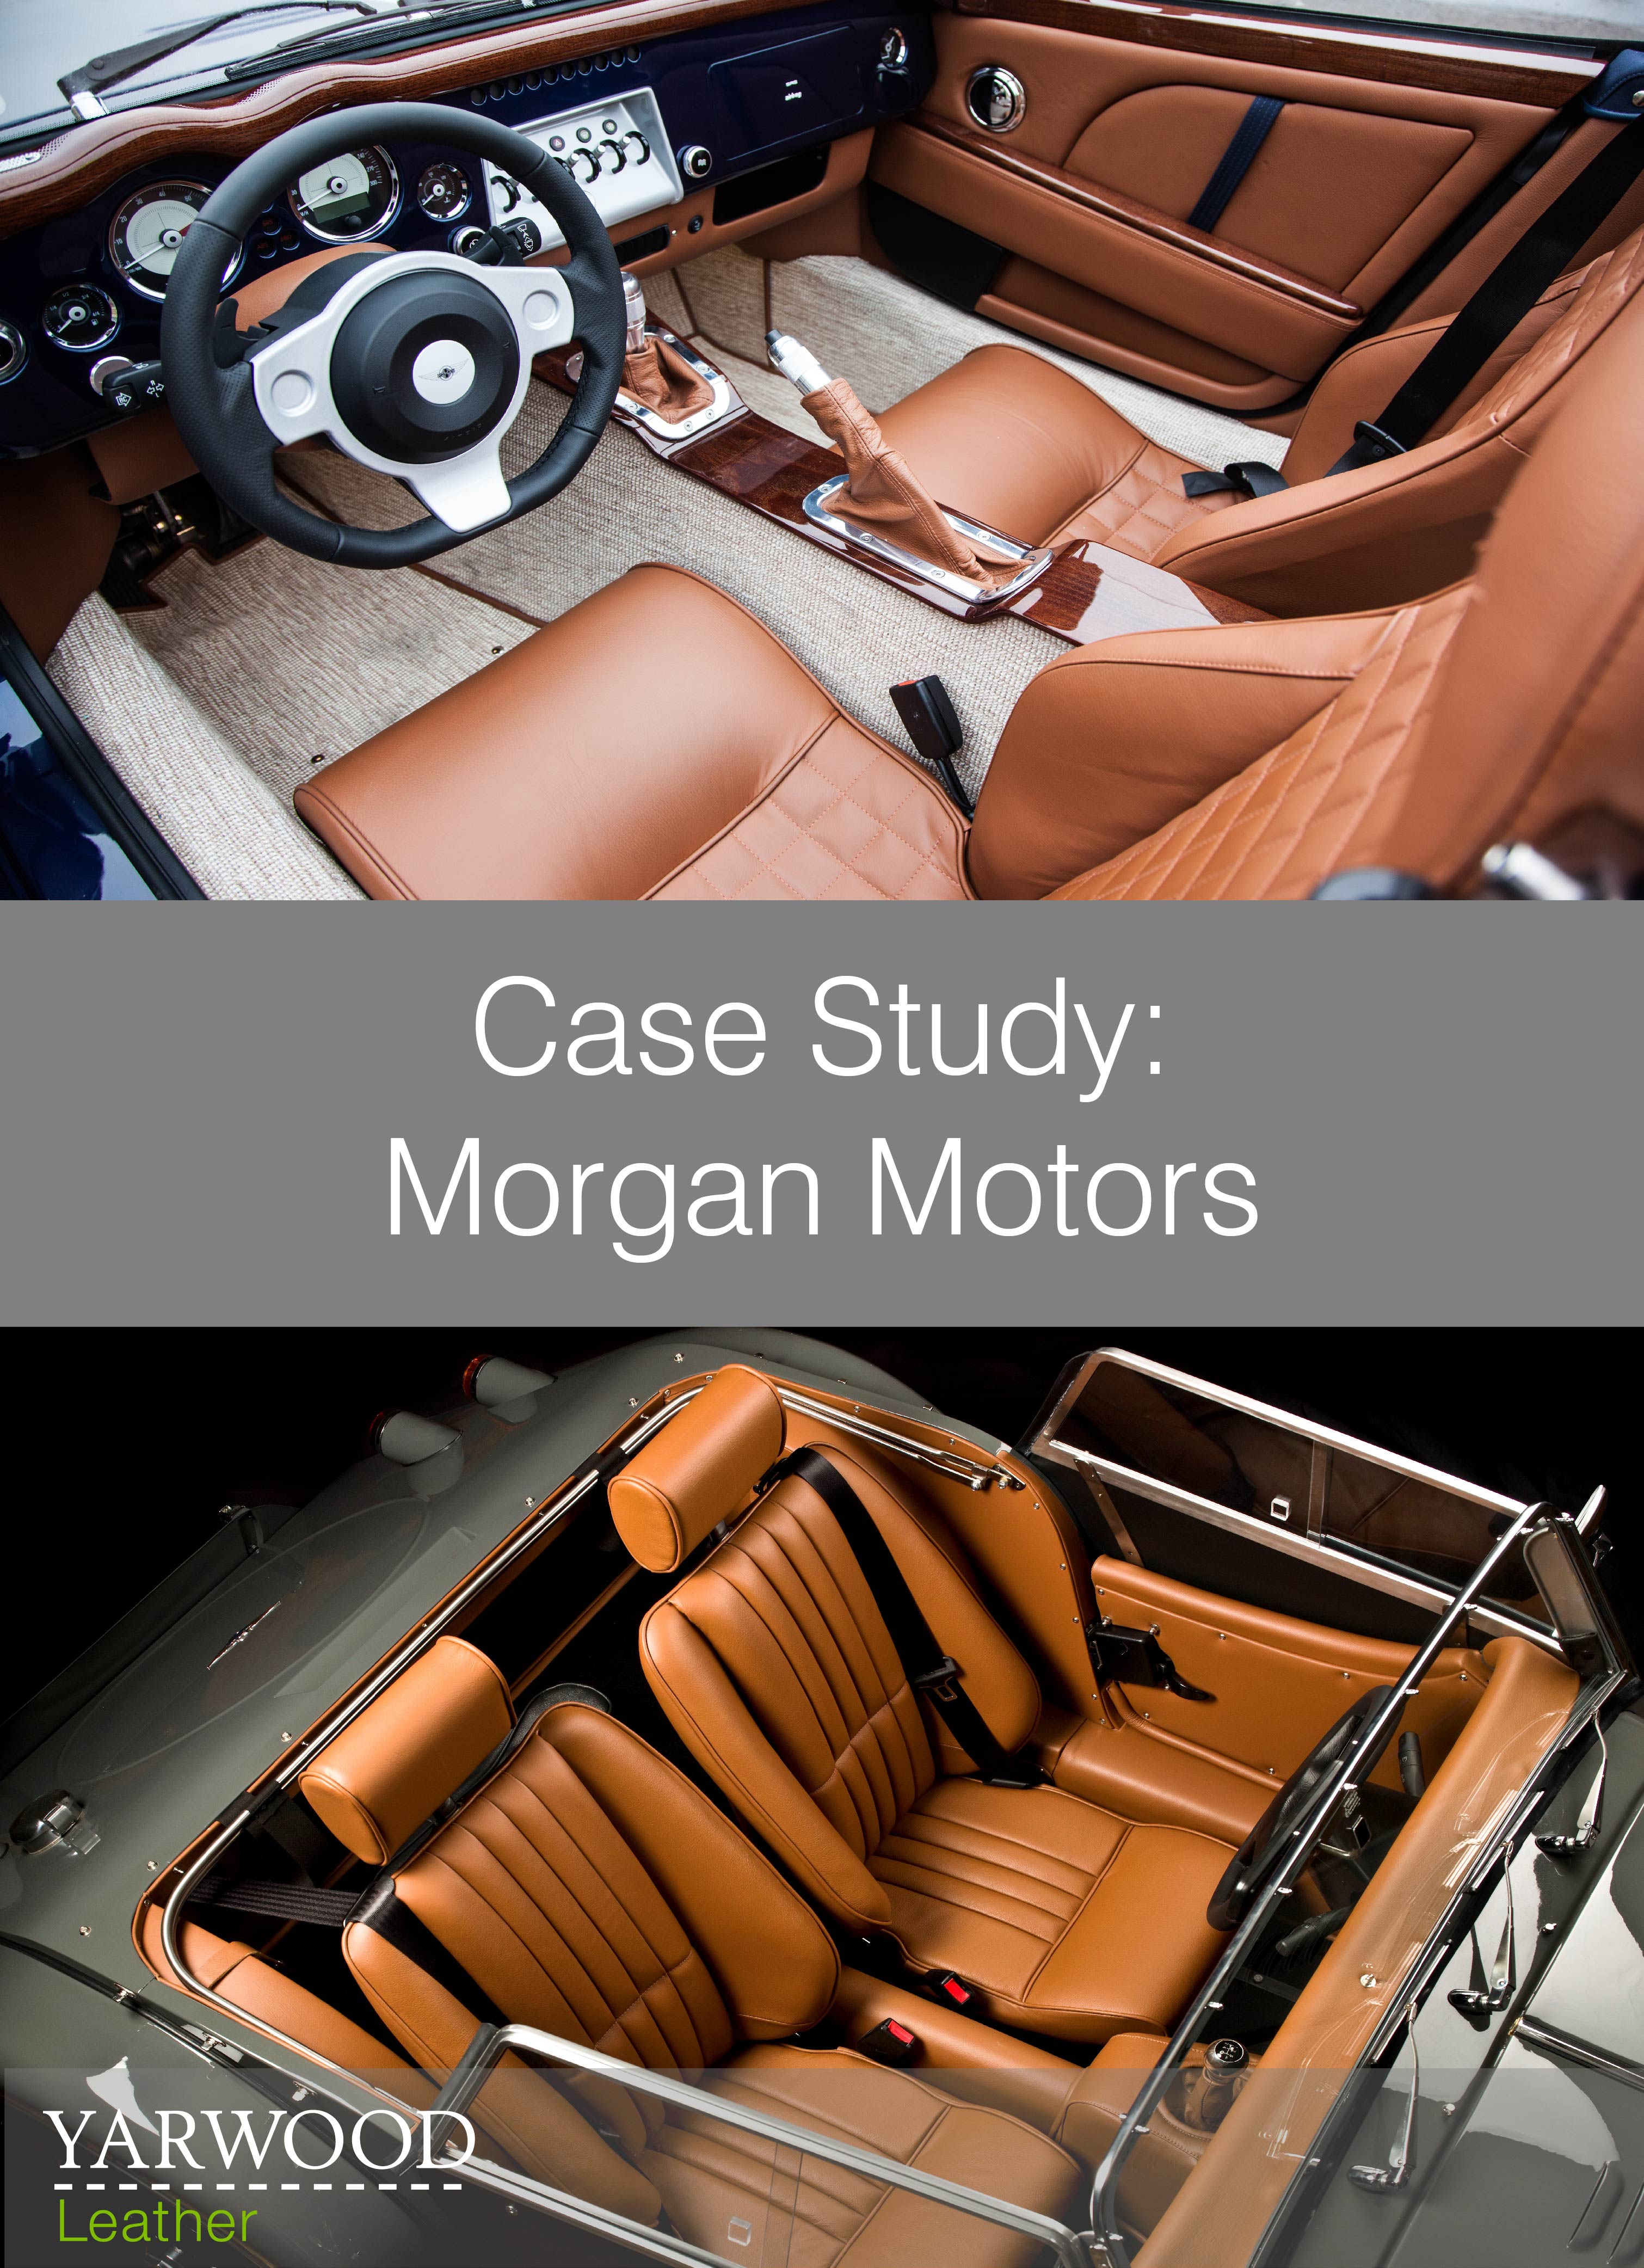 Fast cars with luxury leather, Yarwood Leather is the sole leather supplier to Morgan Motors